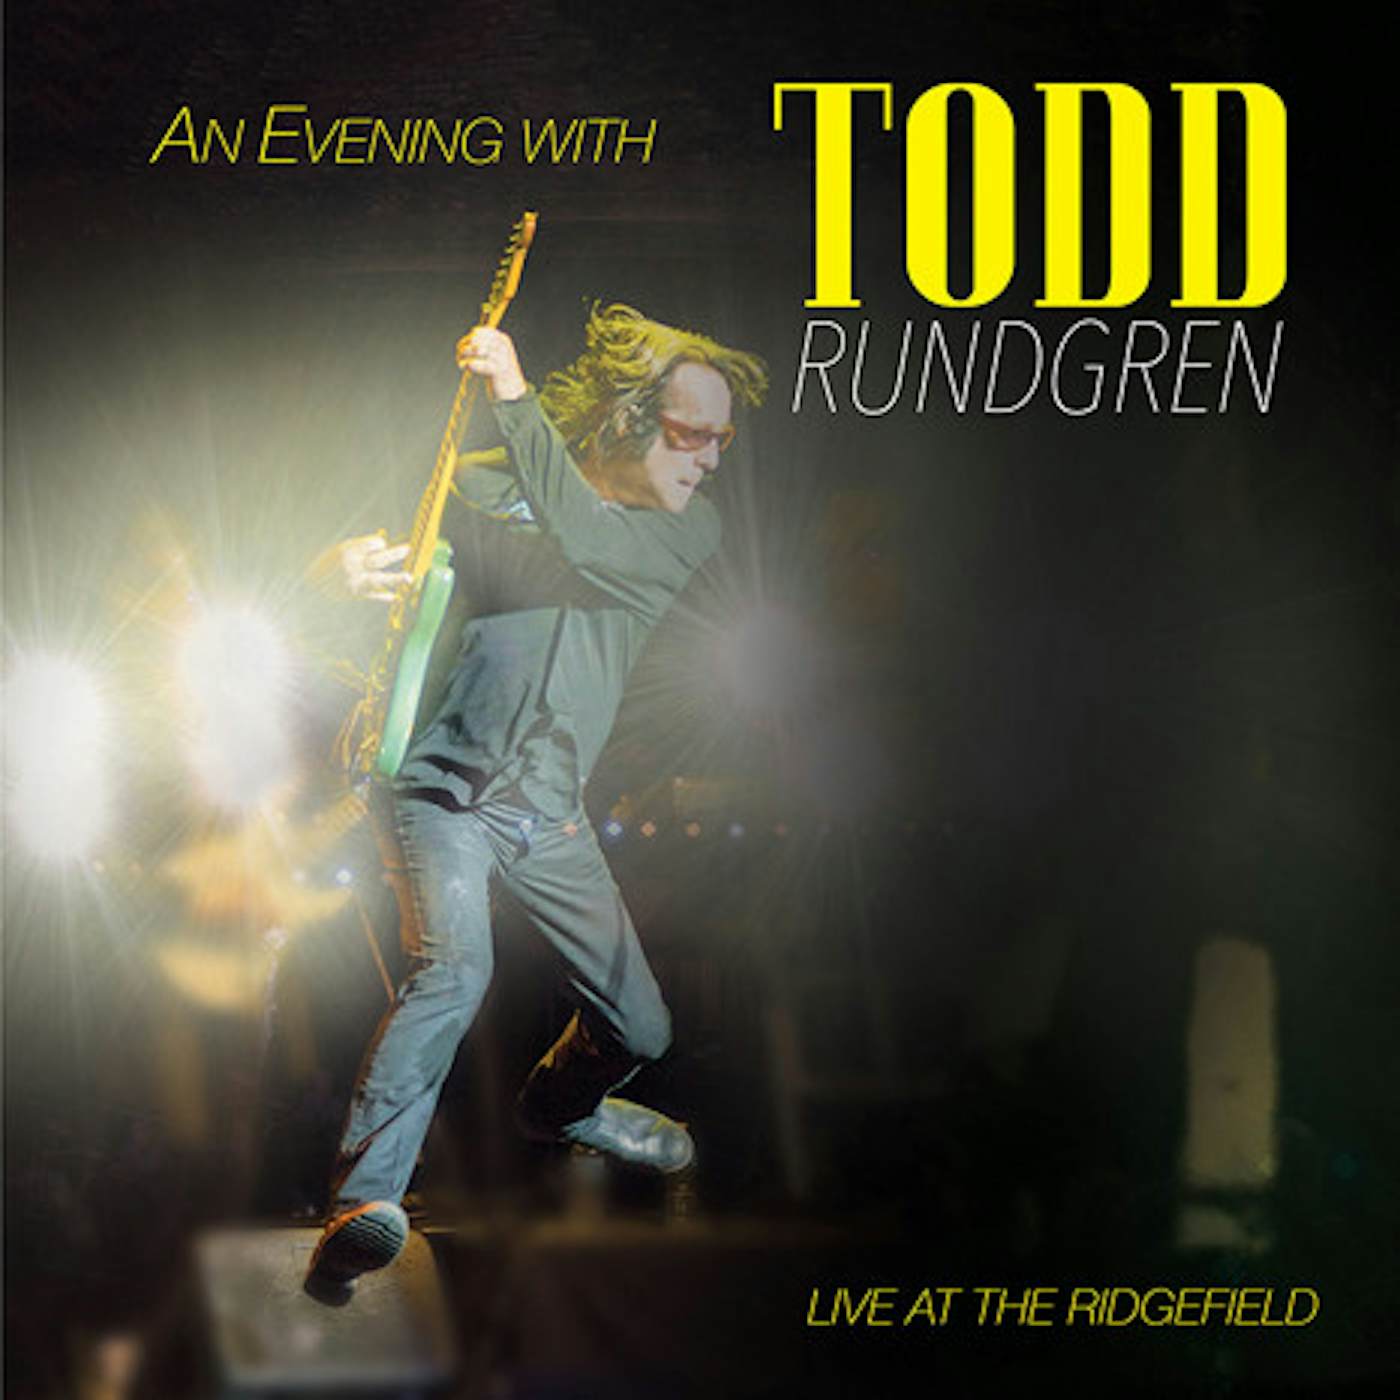 EVENING WITH TODD RUNDGREN-LIVE AT THE RIDGEFIELD Vinyl Record